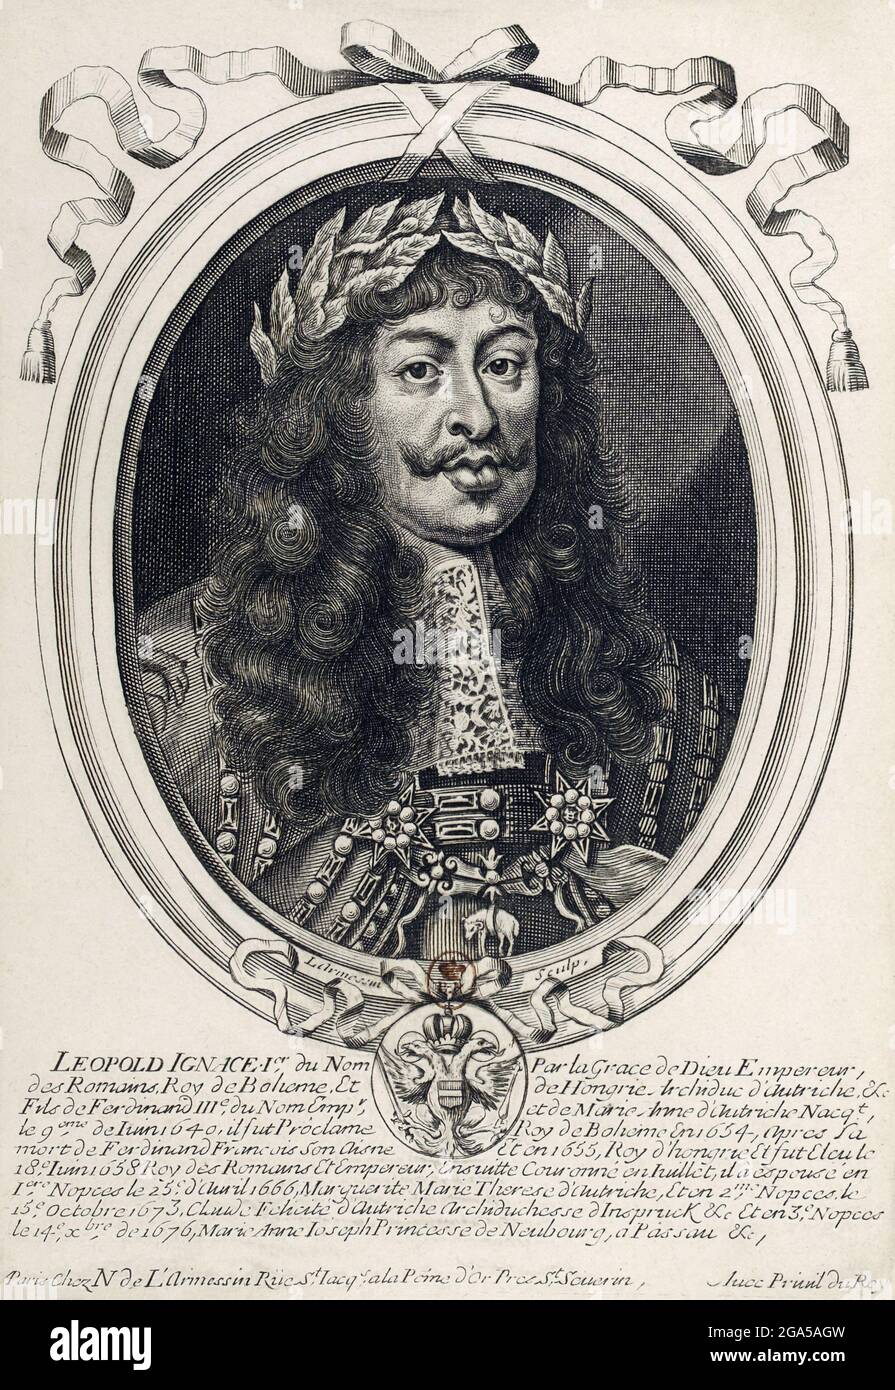 Germany: Copper engraving of Leopold I (1640-1705), 37th Holy Roman emperor, by Nicolas II de Larmessin (1632-1694), c. 1690. Leopold I was the second son of Emperor Ferdinand III, and became heir apparent after the death of his older brother, Ferdinand IV. He was elected Holy Roman Emperor in 1658 after his father's death, and by then had also already become Archduke of Austria and claimed the crowns of Germany, Croatia, Bohemia and Hungary. Stock Photo